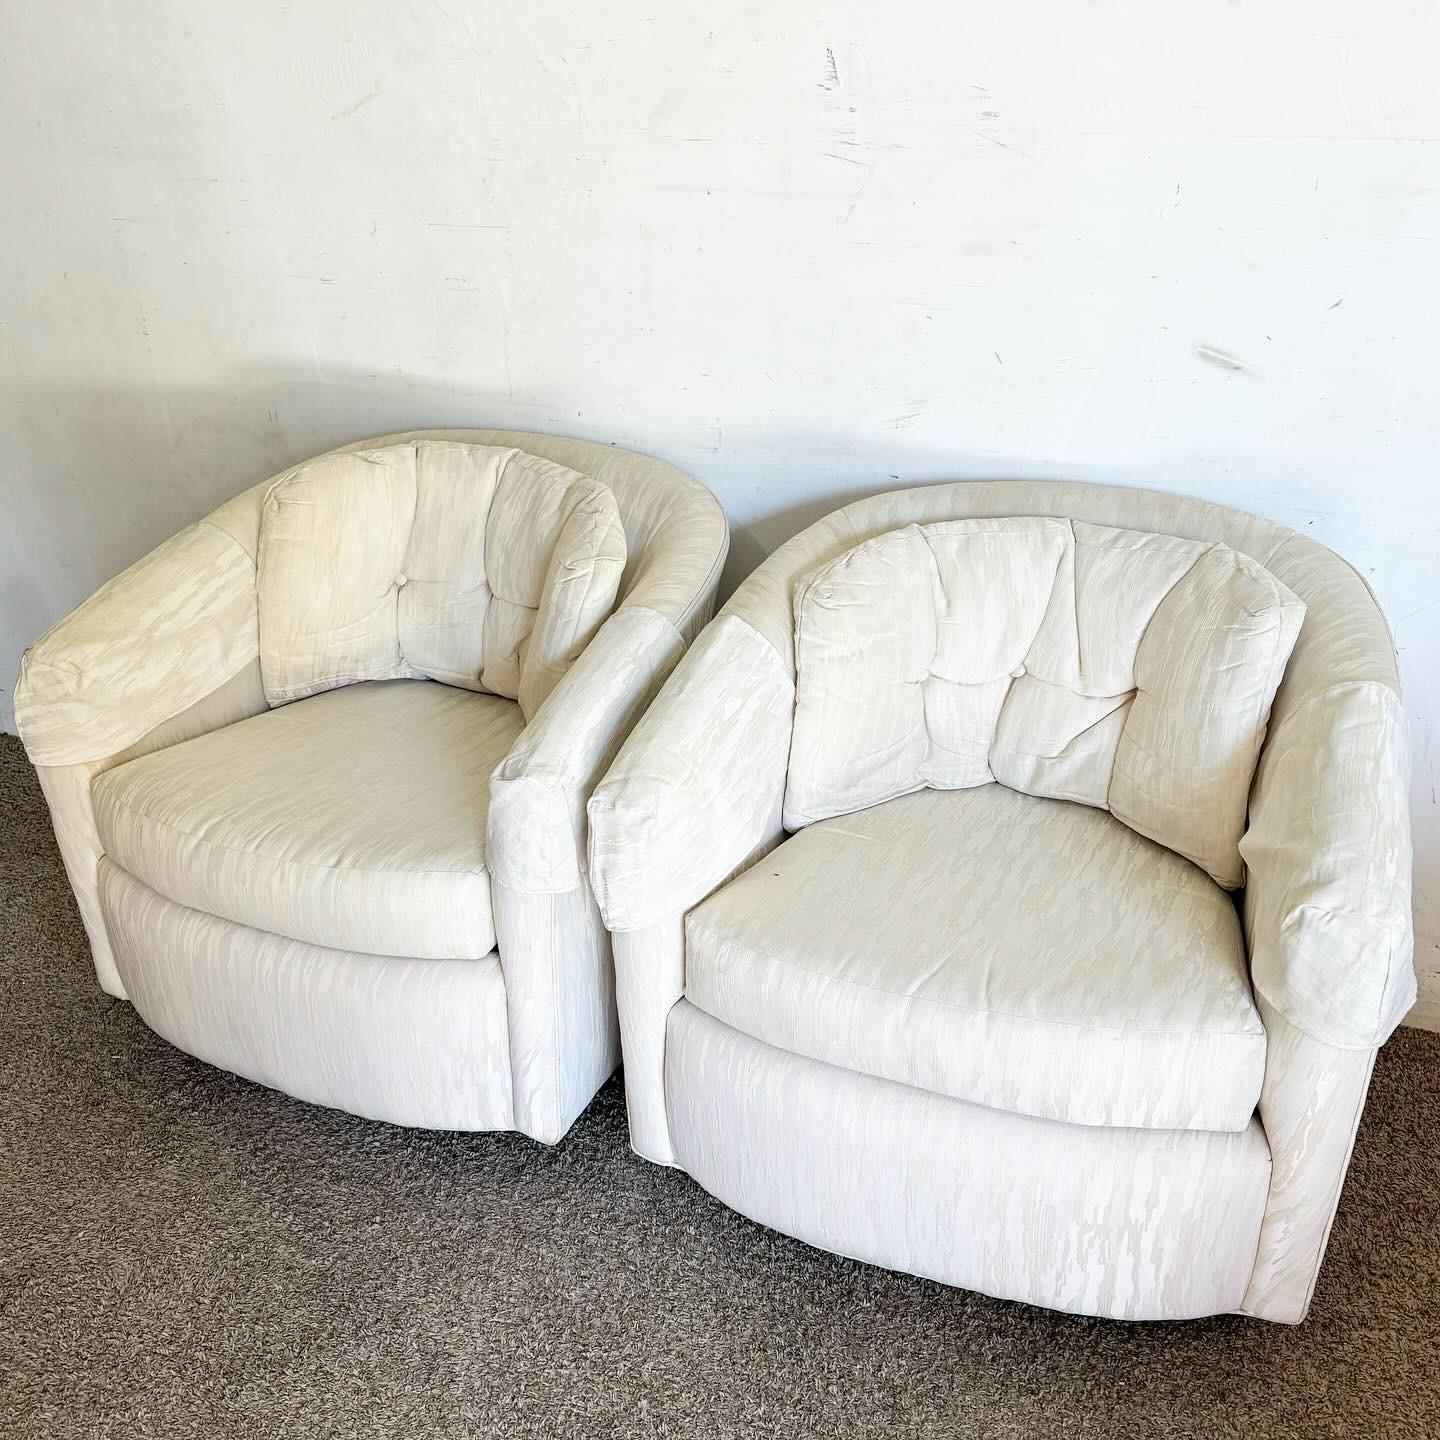 Introducing a pair of Postmodern Tufted Barrel Swivel Chairs, where luxurious tufting meets dynamic swivel functionality. These chairs offer a cozy, stylish seating solution, perfect for any contemporary space seeking a blend of comfort and modern